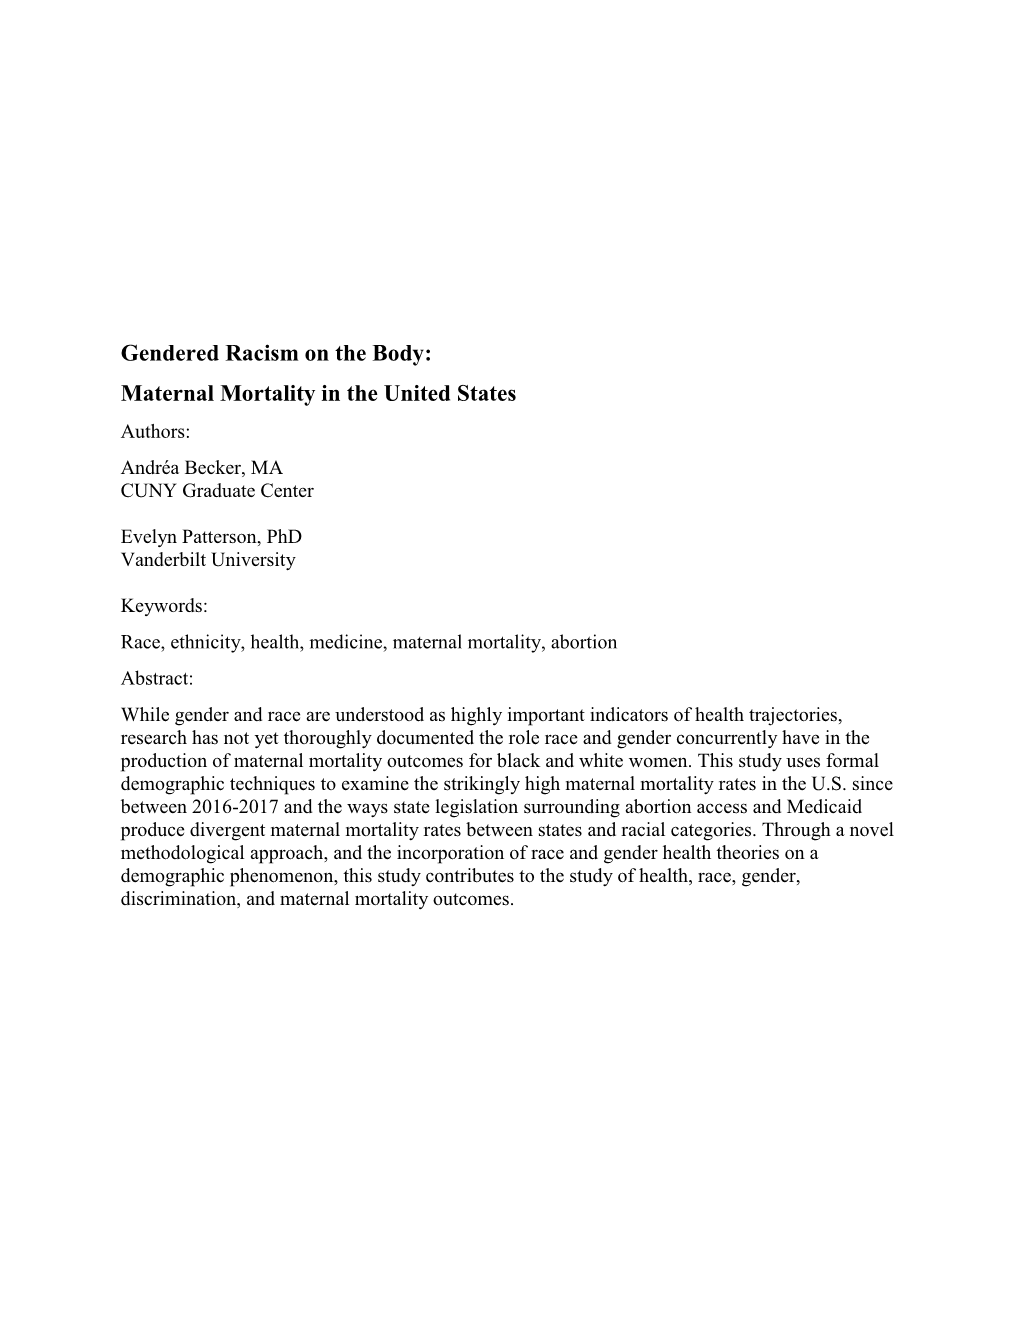 Maternal Mortality in the United States Authors: Andréa Becker, MA CUNY Graduate Center